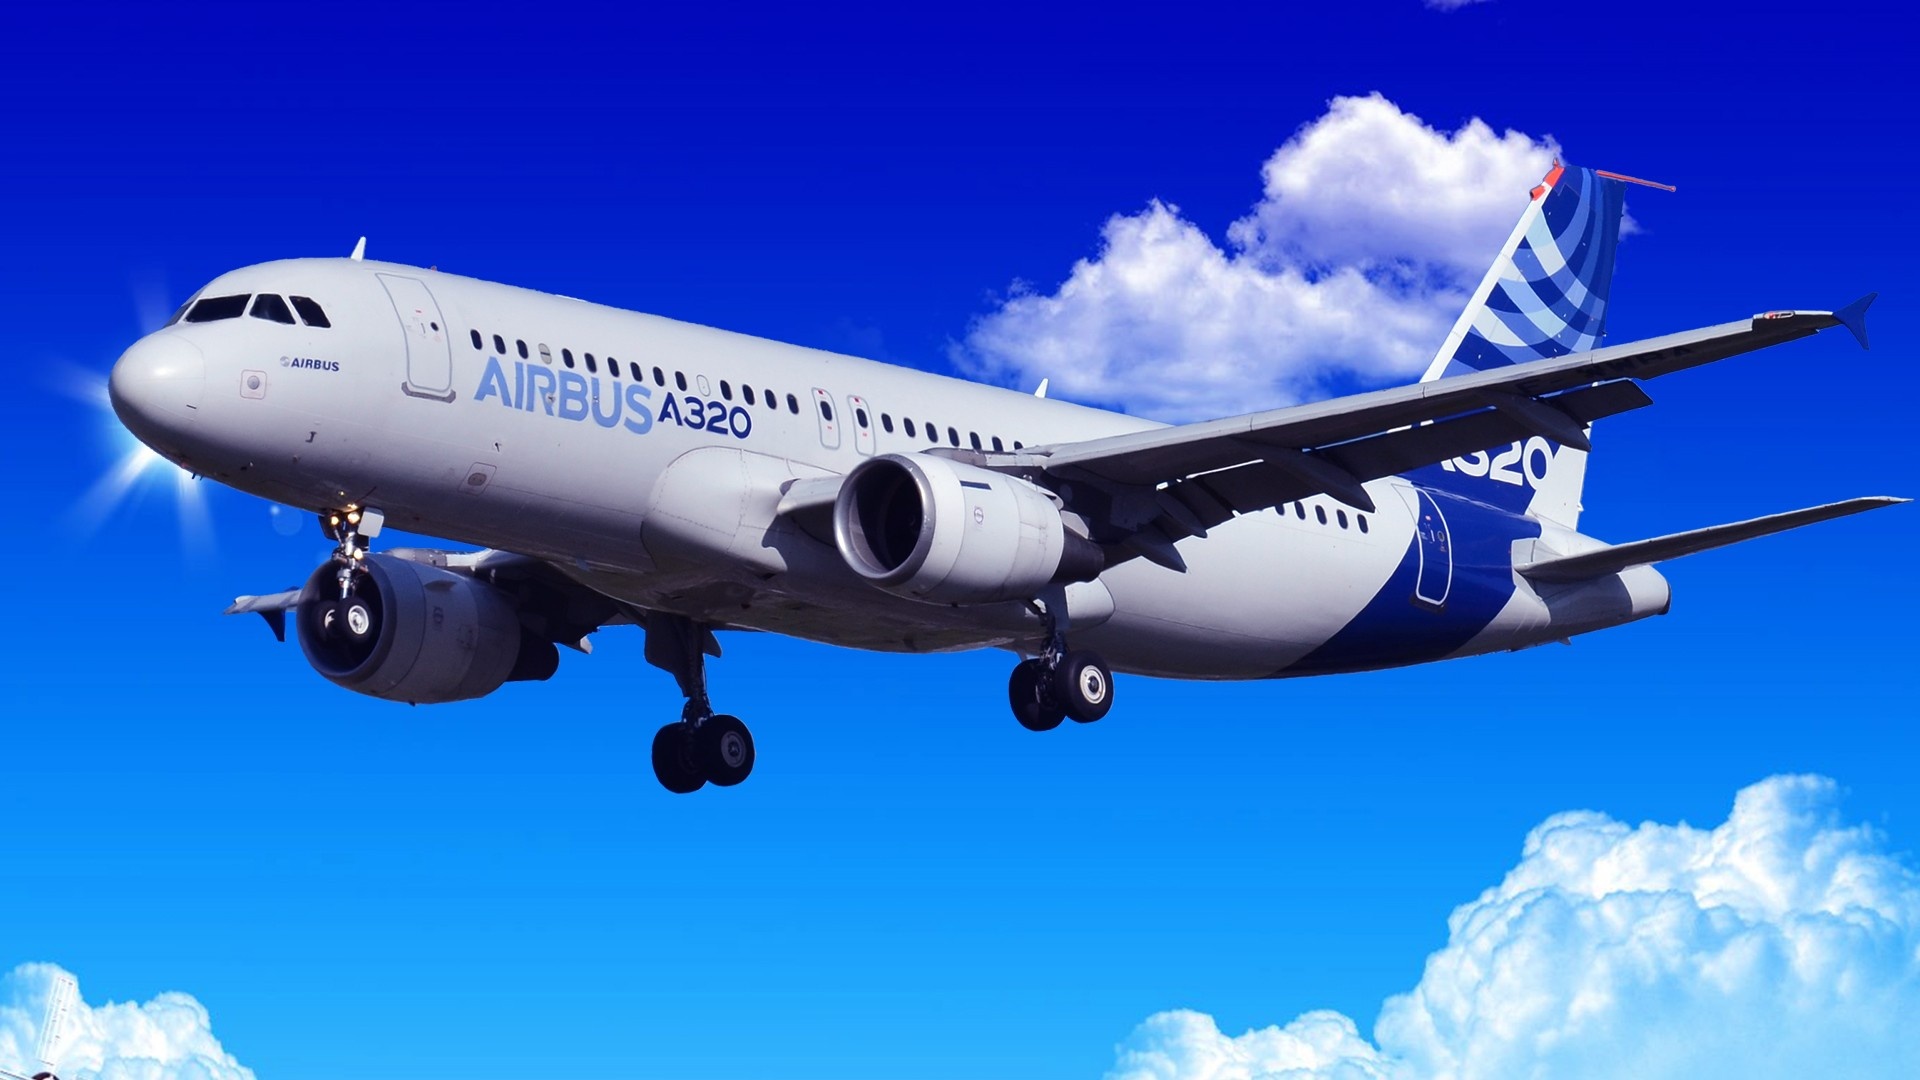 Airbus A320, High-Definition Wallpaper, Excellence in Design, 1920x1080 Full HD Desktop